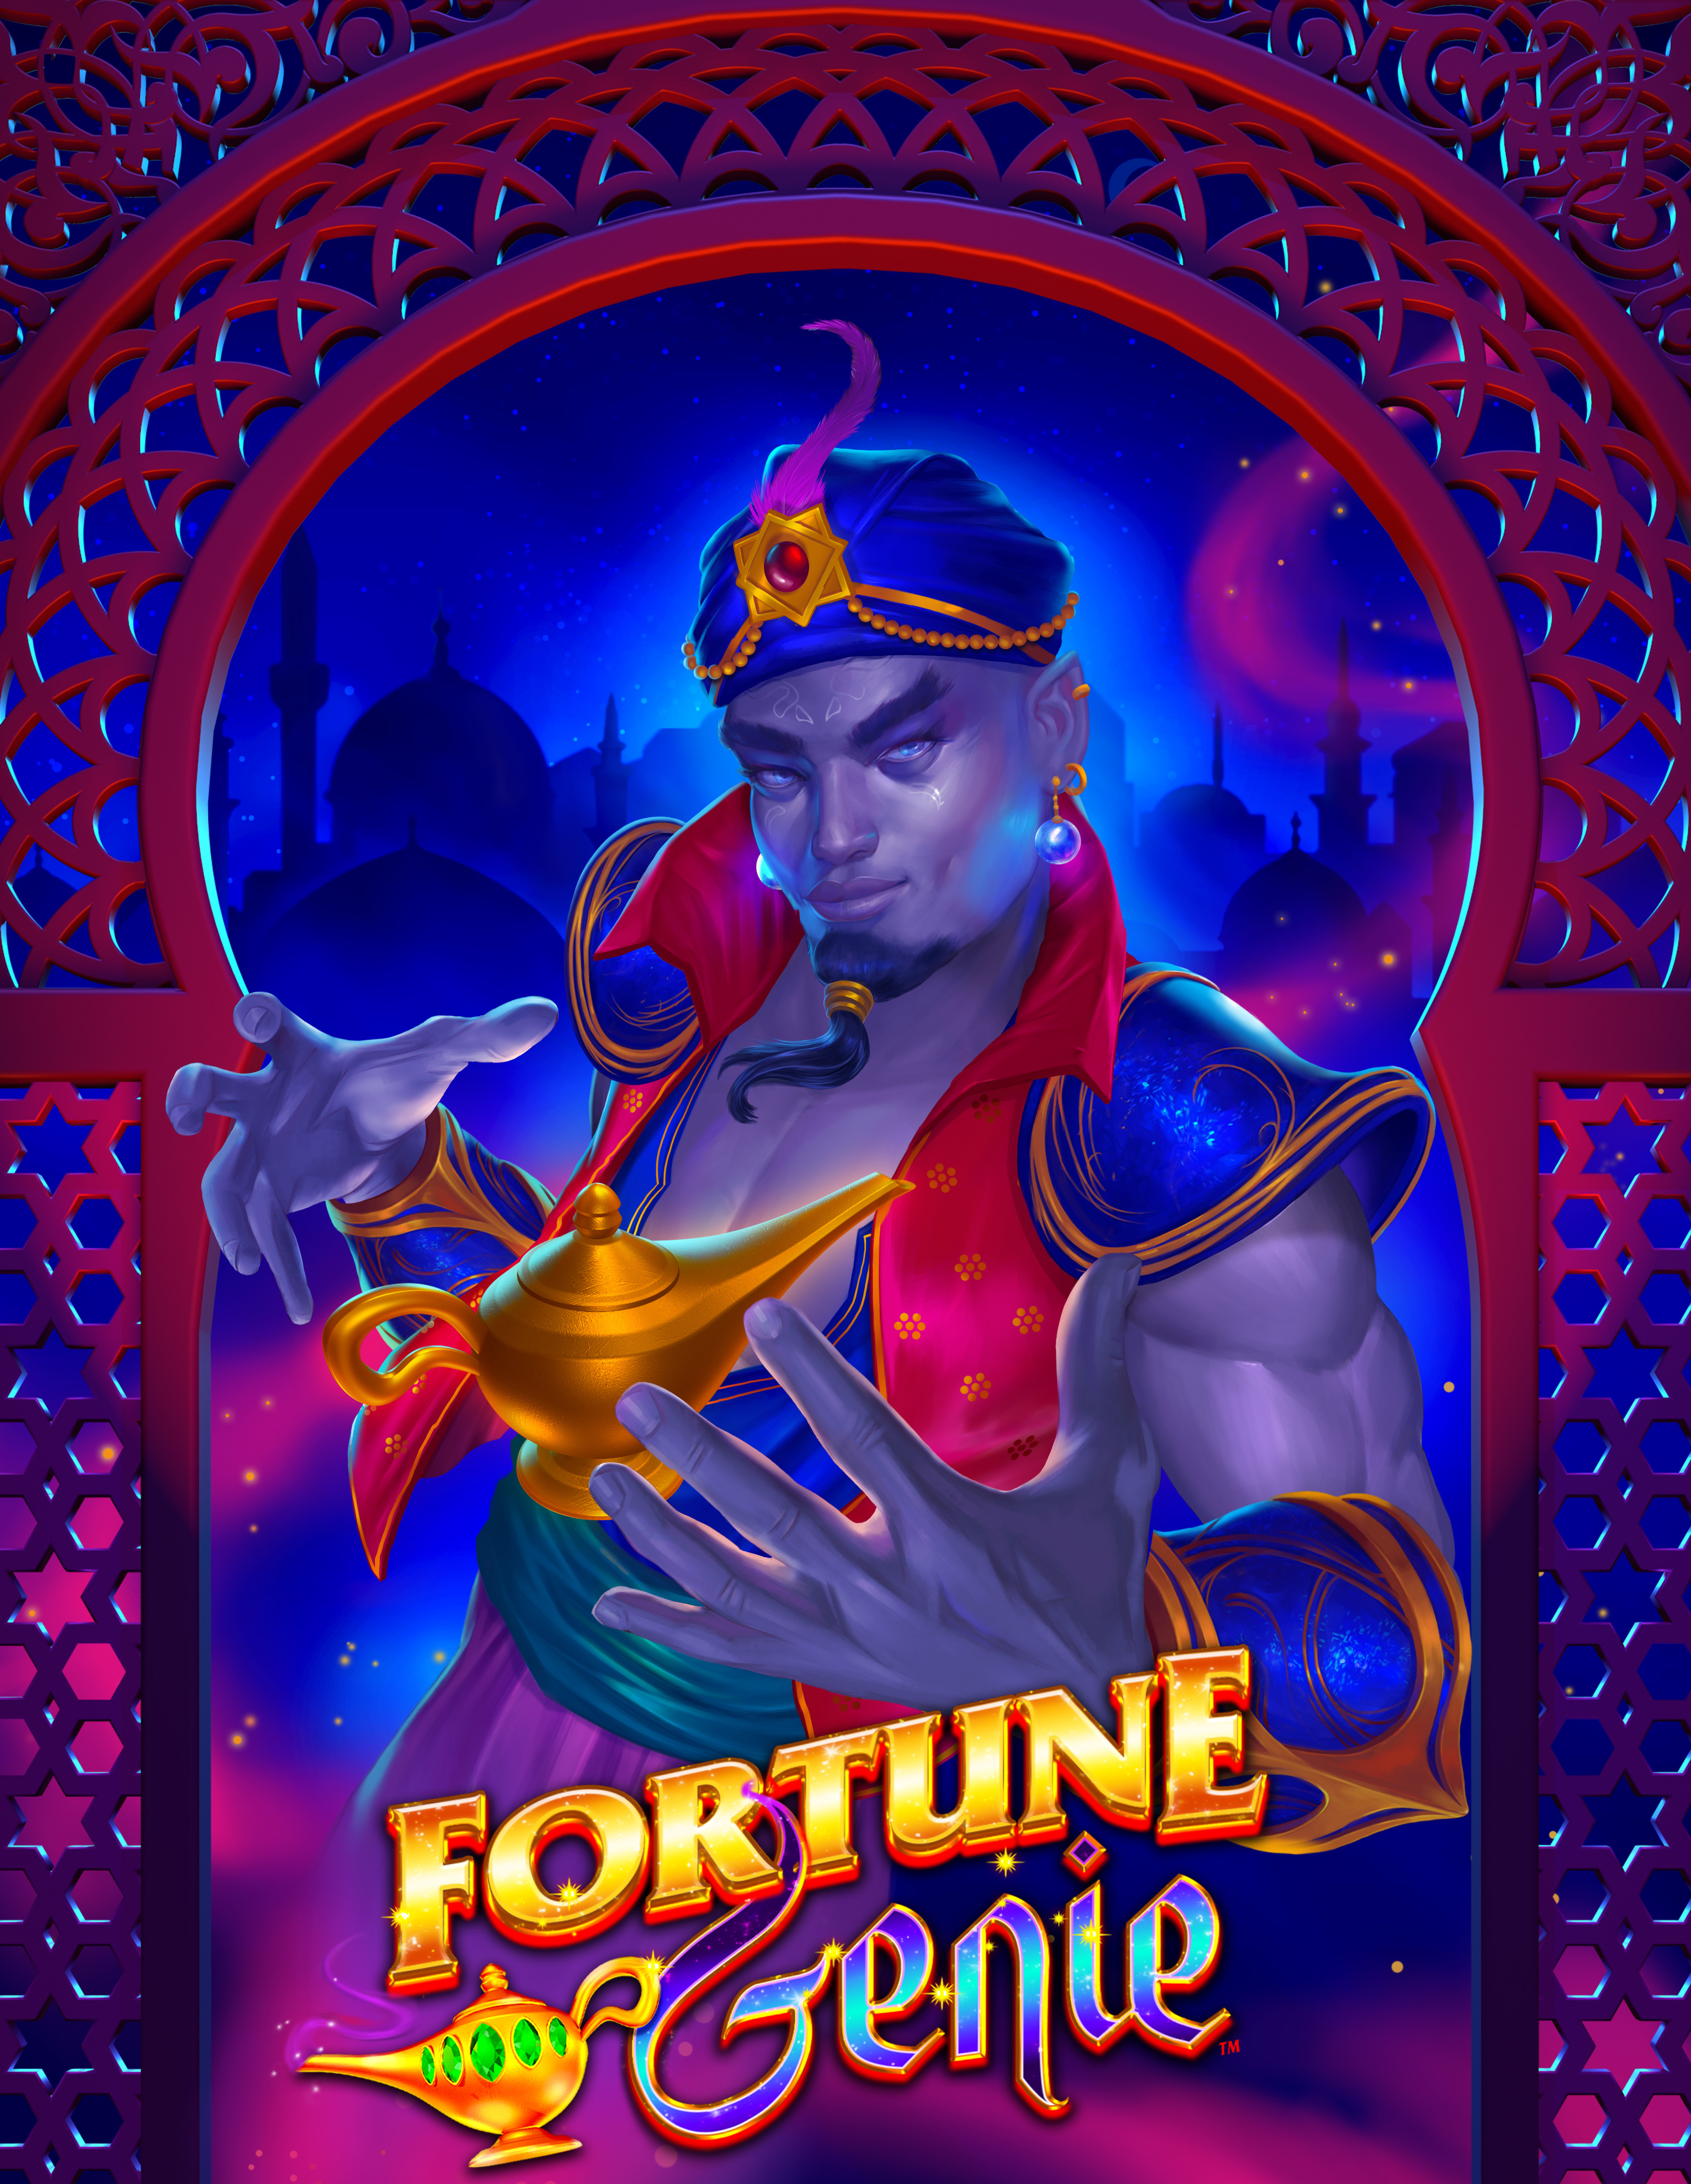 Fortune Genie. I painted this in Photoshop. I created the lamp and arch in Zbrush and rendered in Marmoset. 